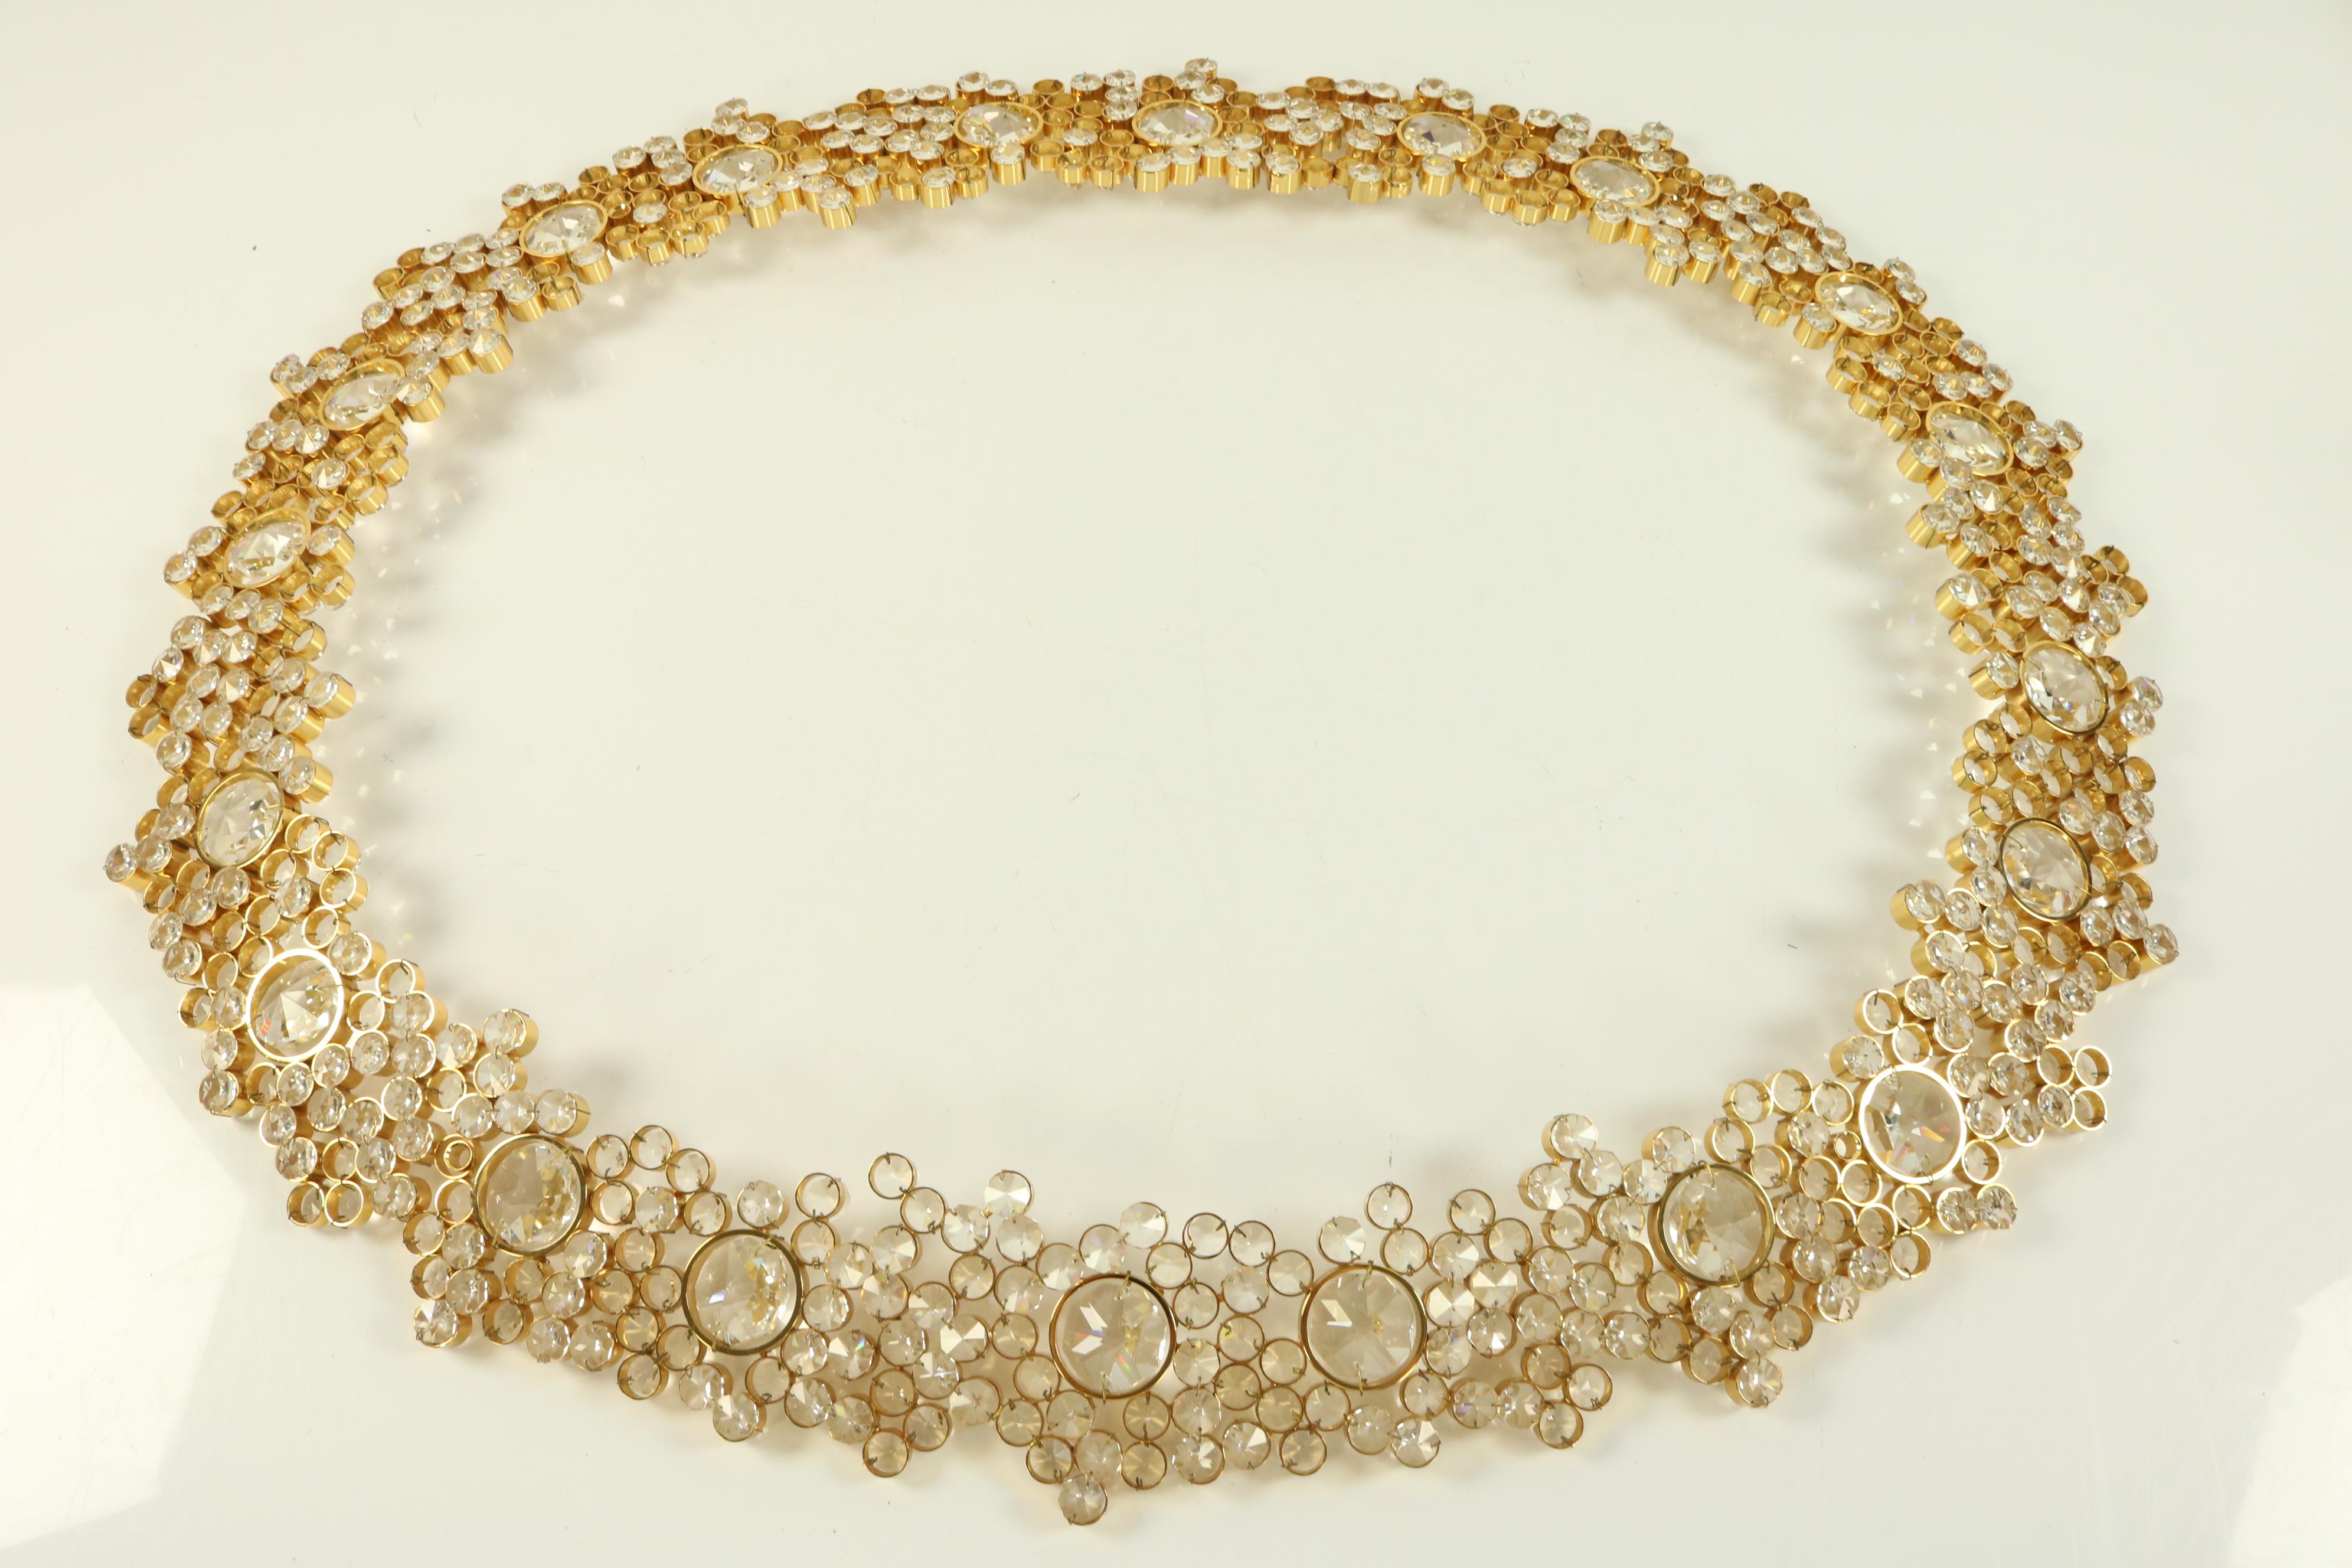 Iluminated Palwa Mirror Faceted Glass Diamonds in Gilded Brass, 1960s Vintage im Angebot 7